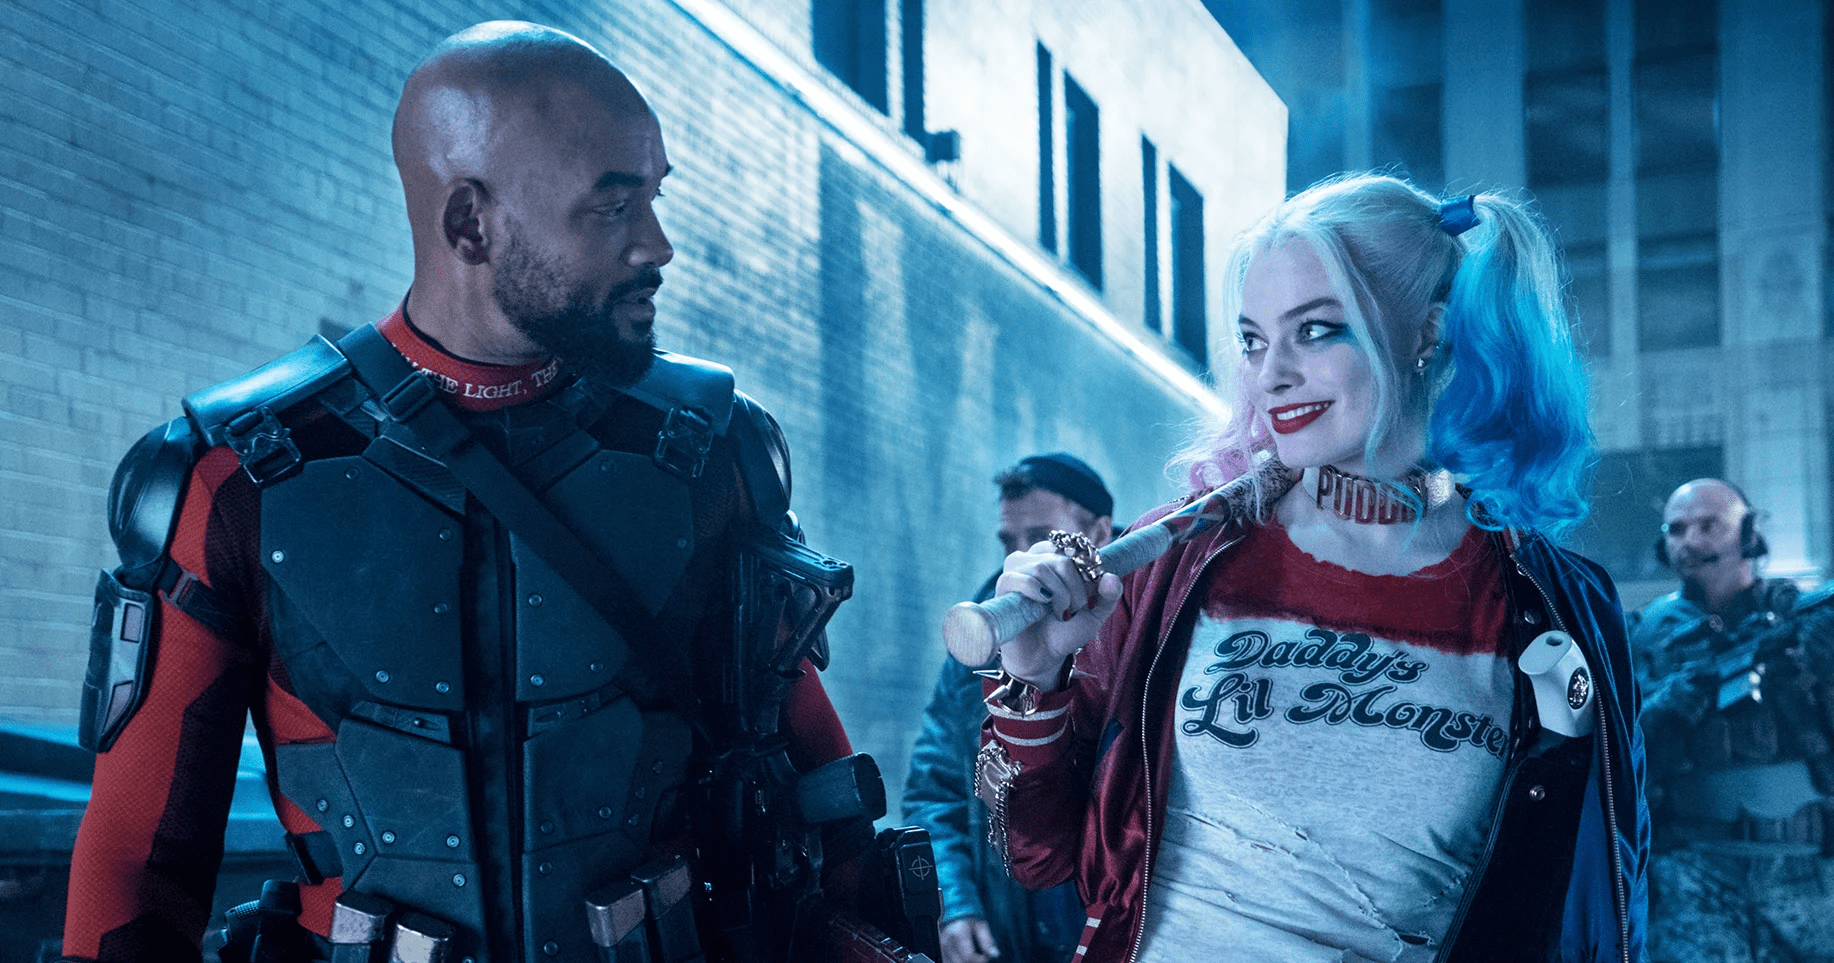 Will Smith and Margot Robbie as Deadshot and Harley Quinn, Suicide Squad (2016)